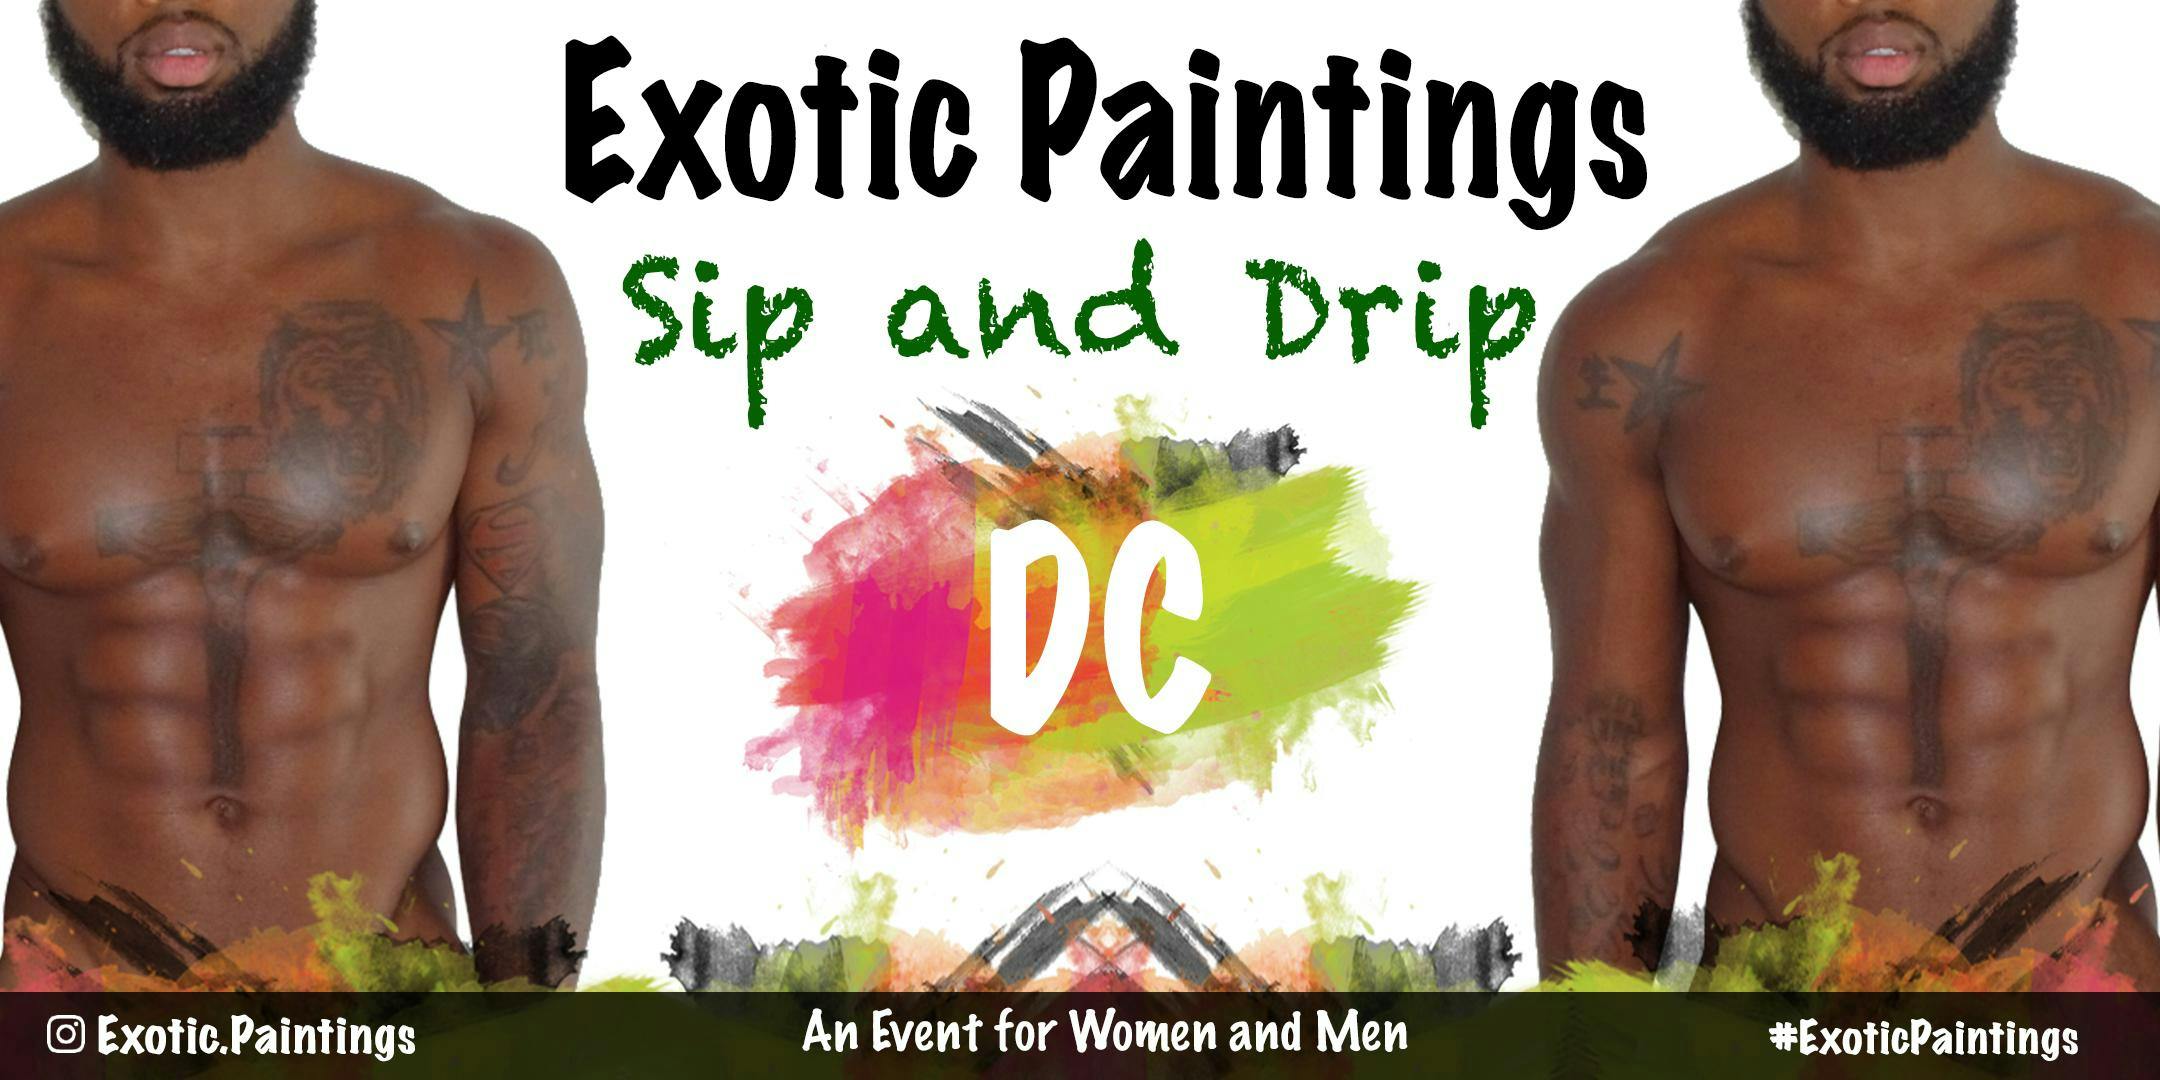 Sip and exotic paint males can